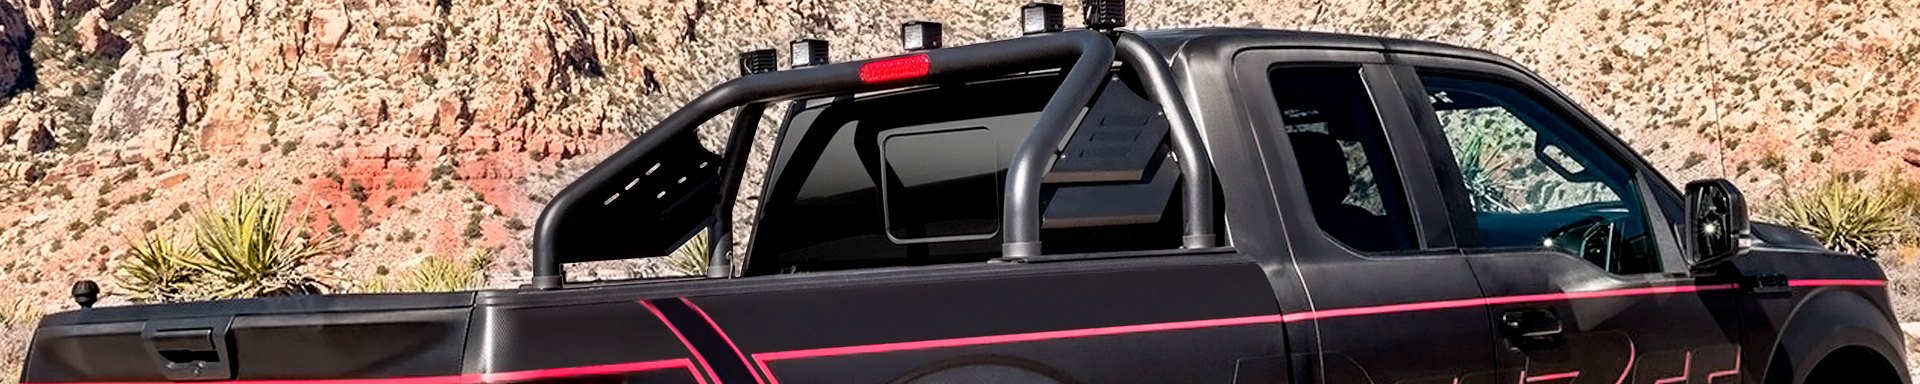 Enhance The Look Of Your Truck With New Dee Zee Louvered Sport Bar